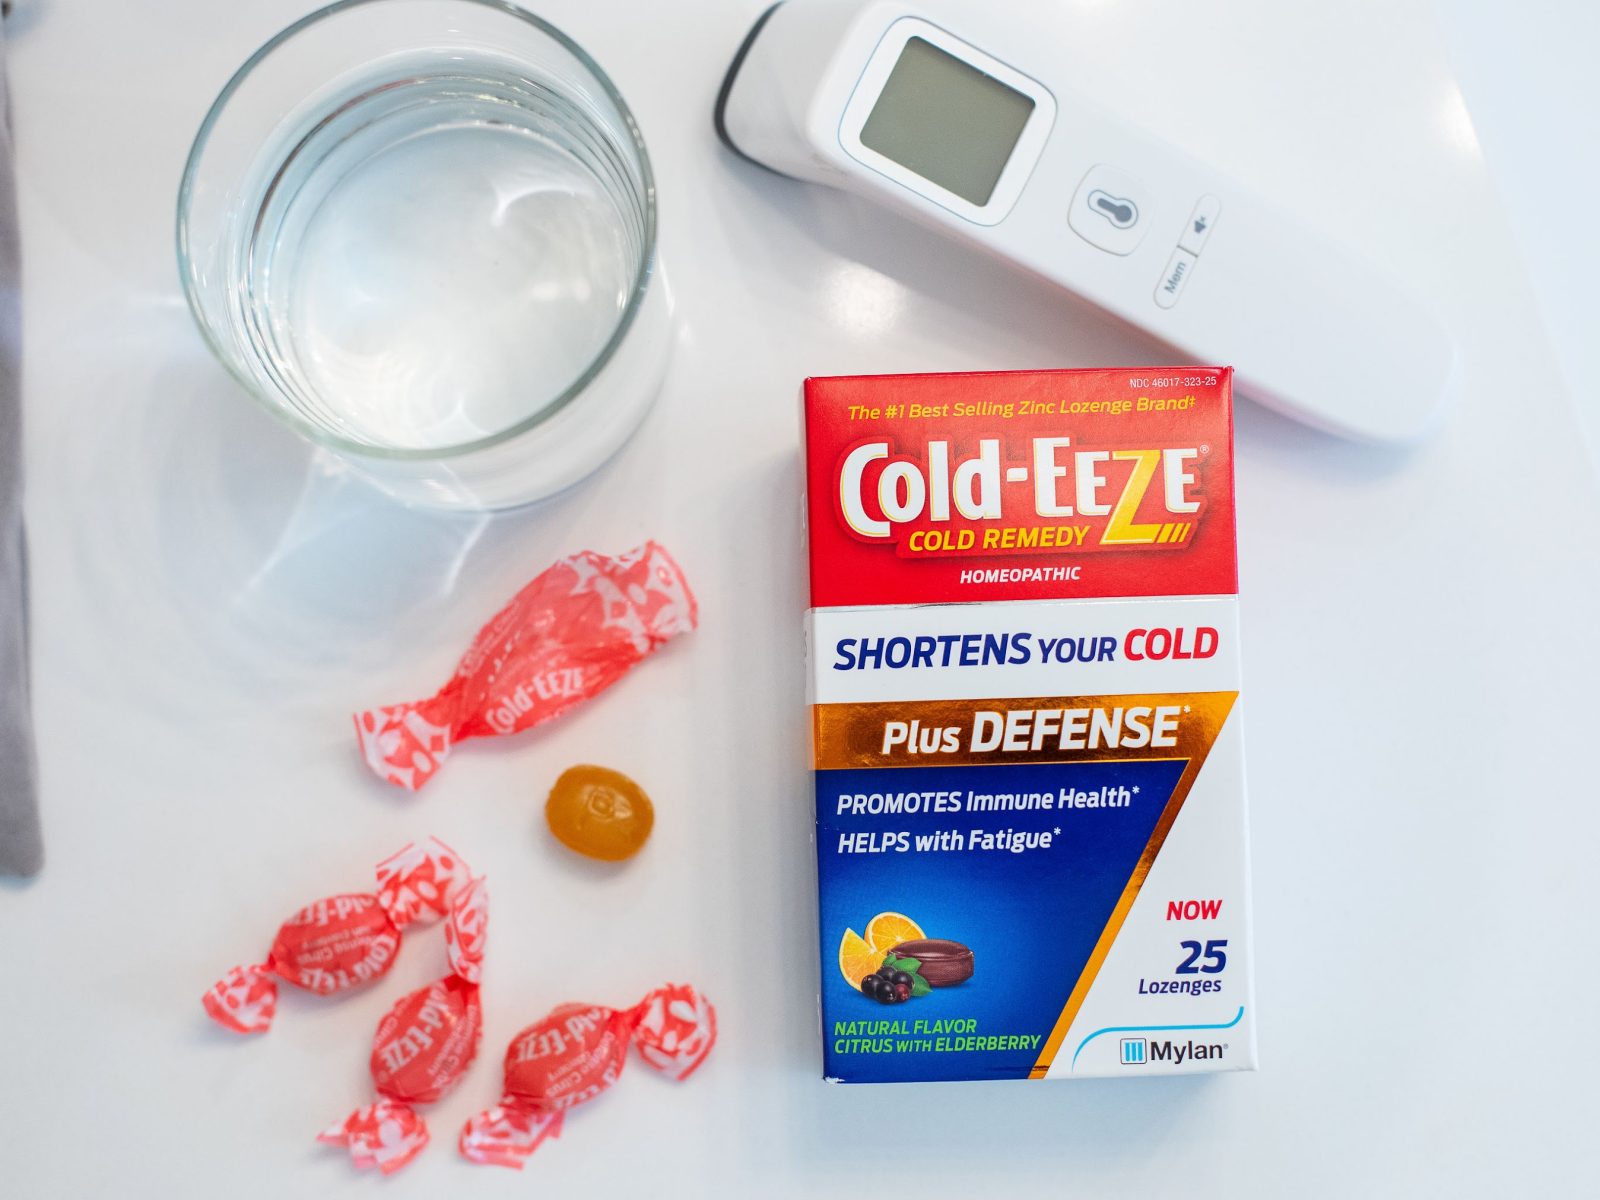 Cold-Eeze Only $6.49 At Kroger – Stock Up For Cold/Flu Season